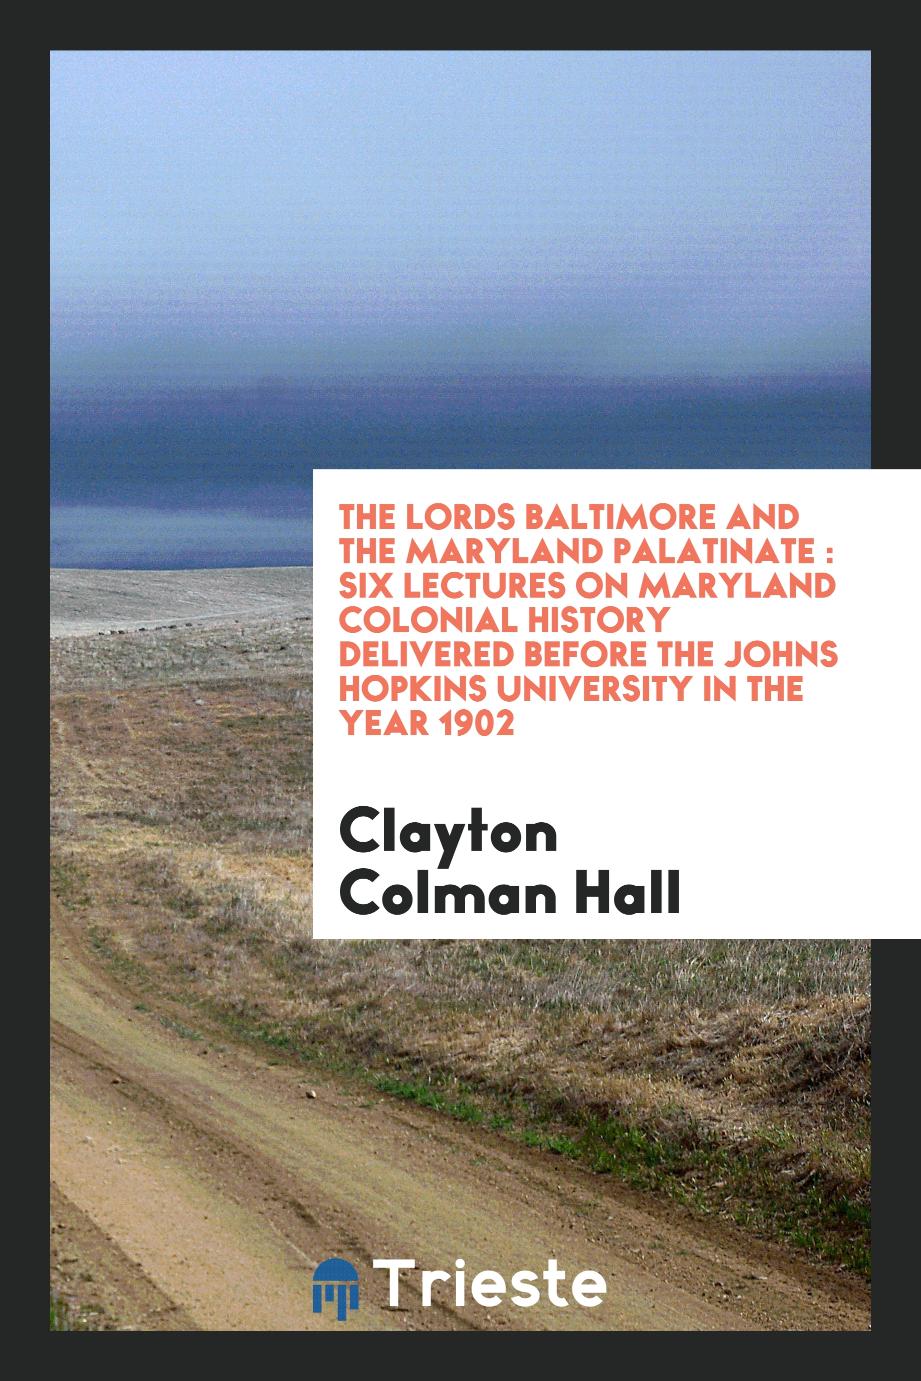 The lords Baltimore and the Maryland palatinate : six lectures on Maryland colonial history delivered before the Johns Hopkins University in the year 1902